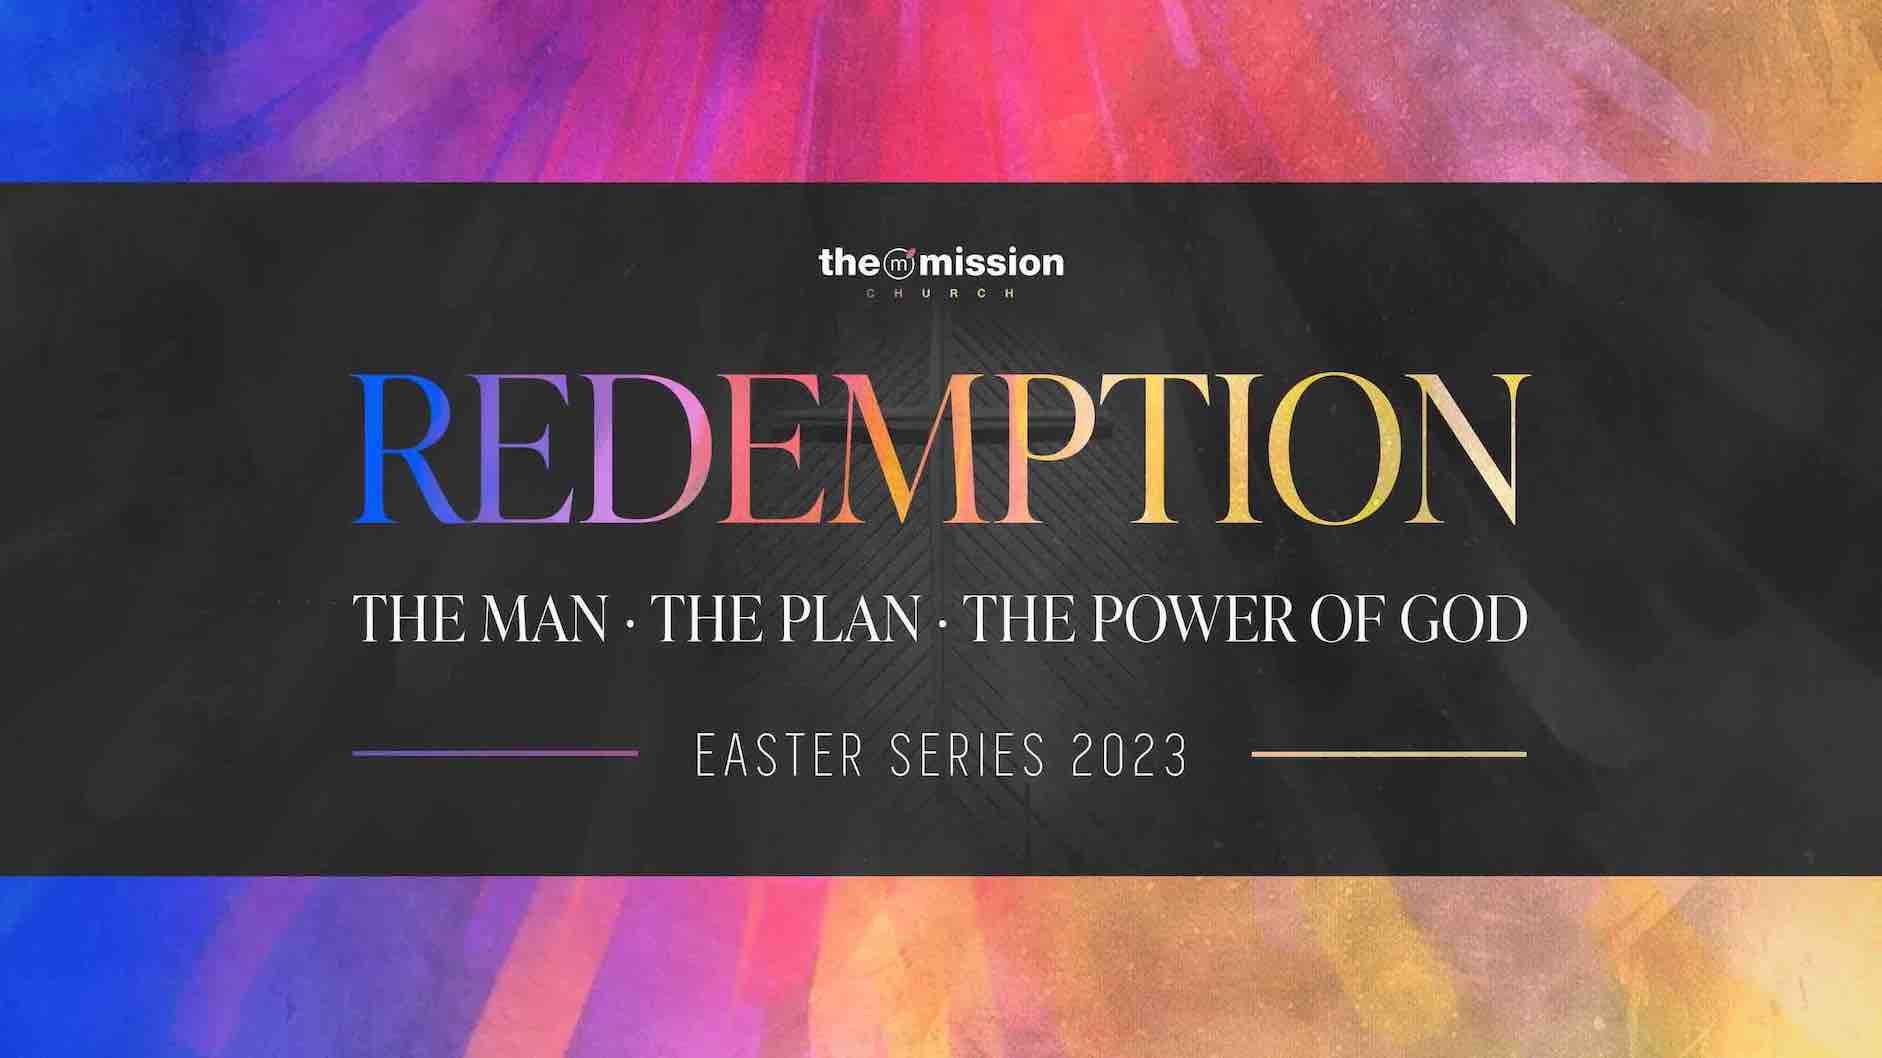 Easter 2023, Good Friday, Palm Sunday, Jesus, Plan of Salvation, Redemption: The Man, The Plan, The Power of God